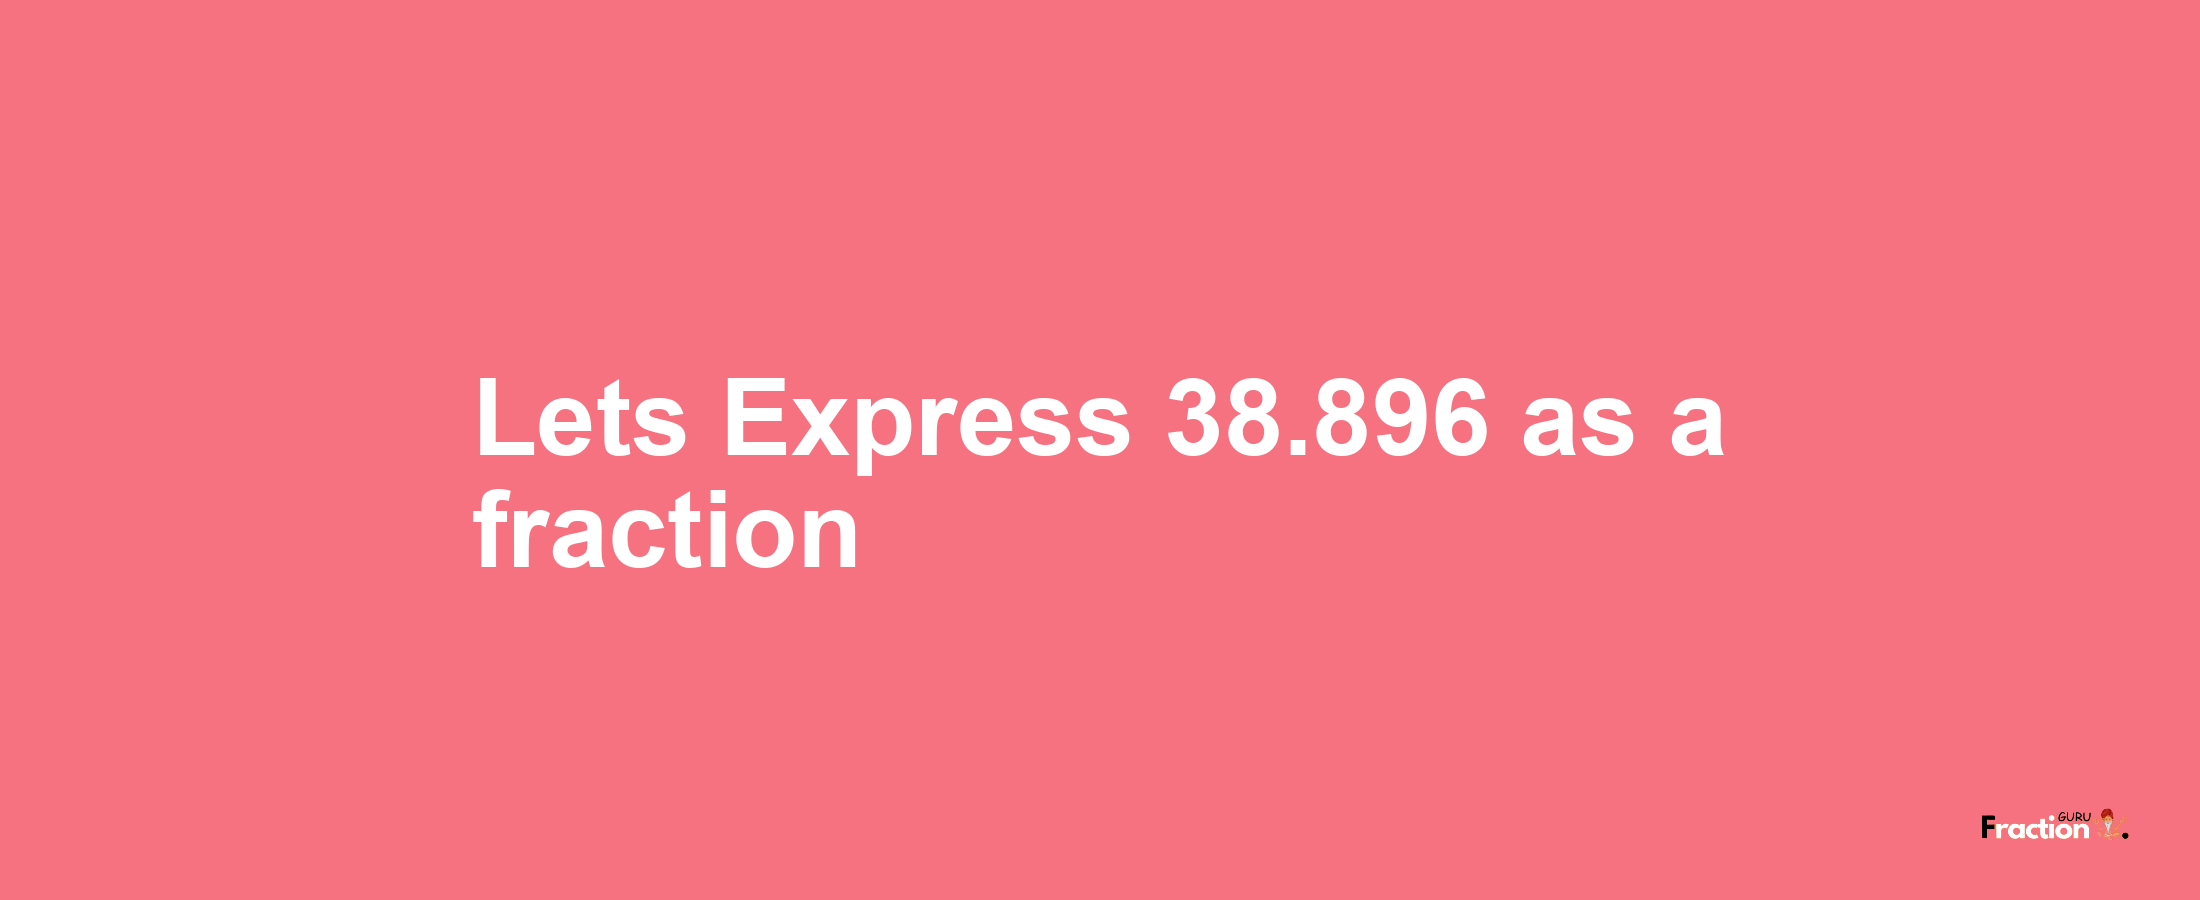 Lets Express 38.896 as afraction